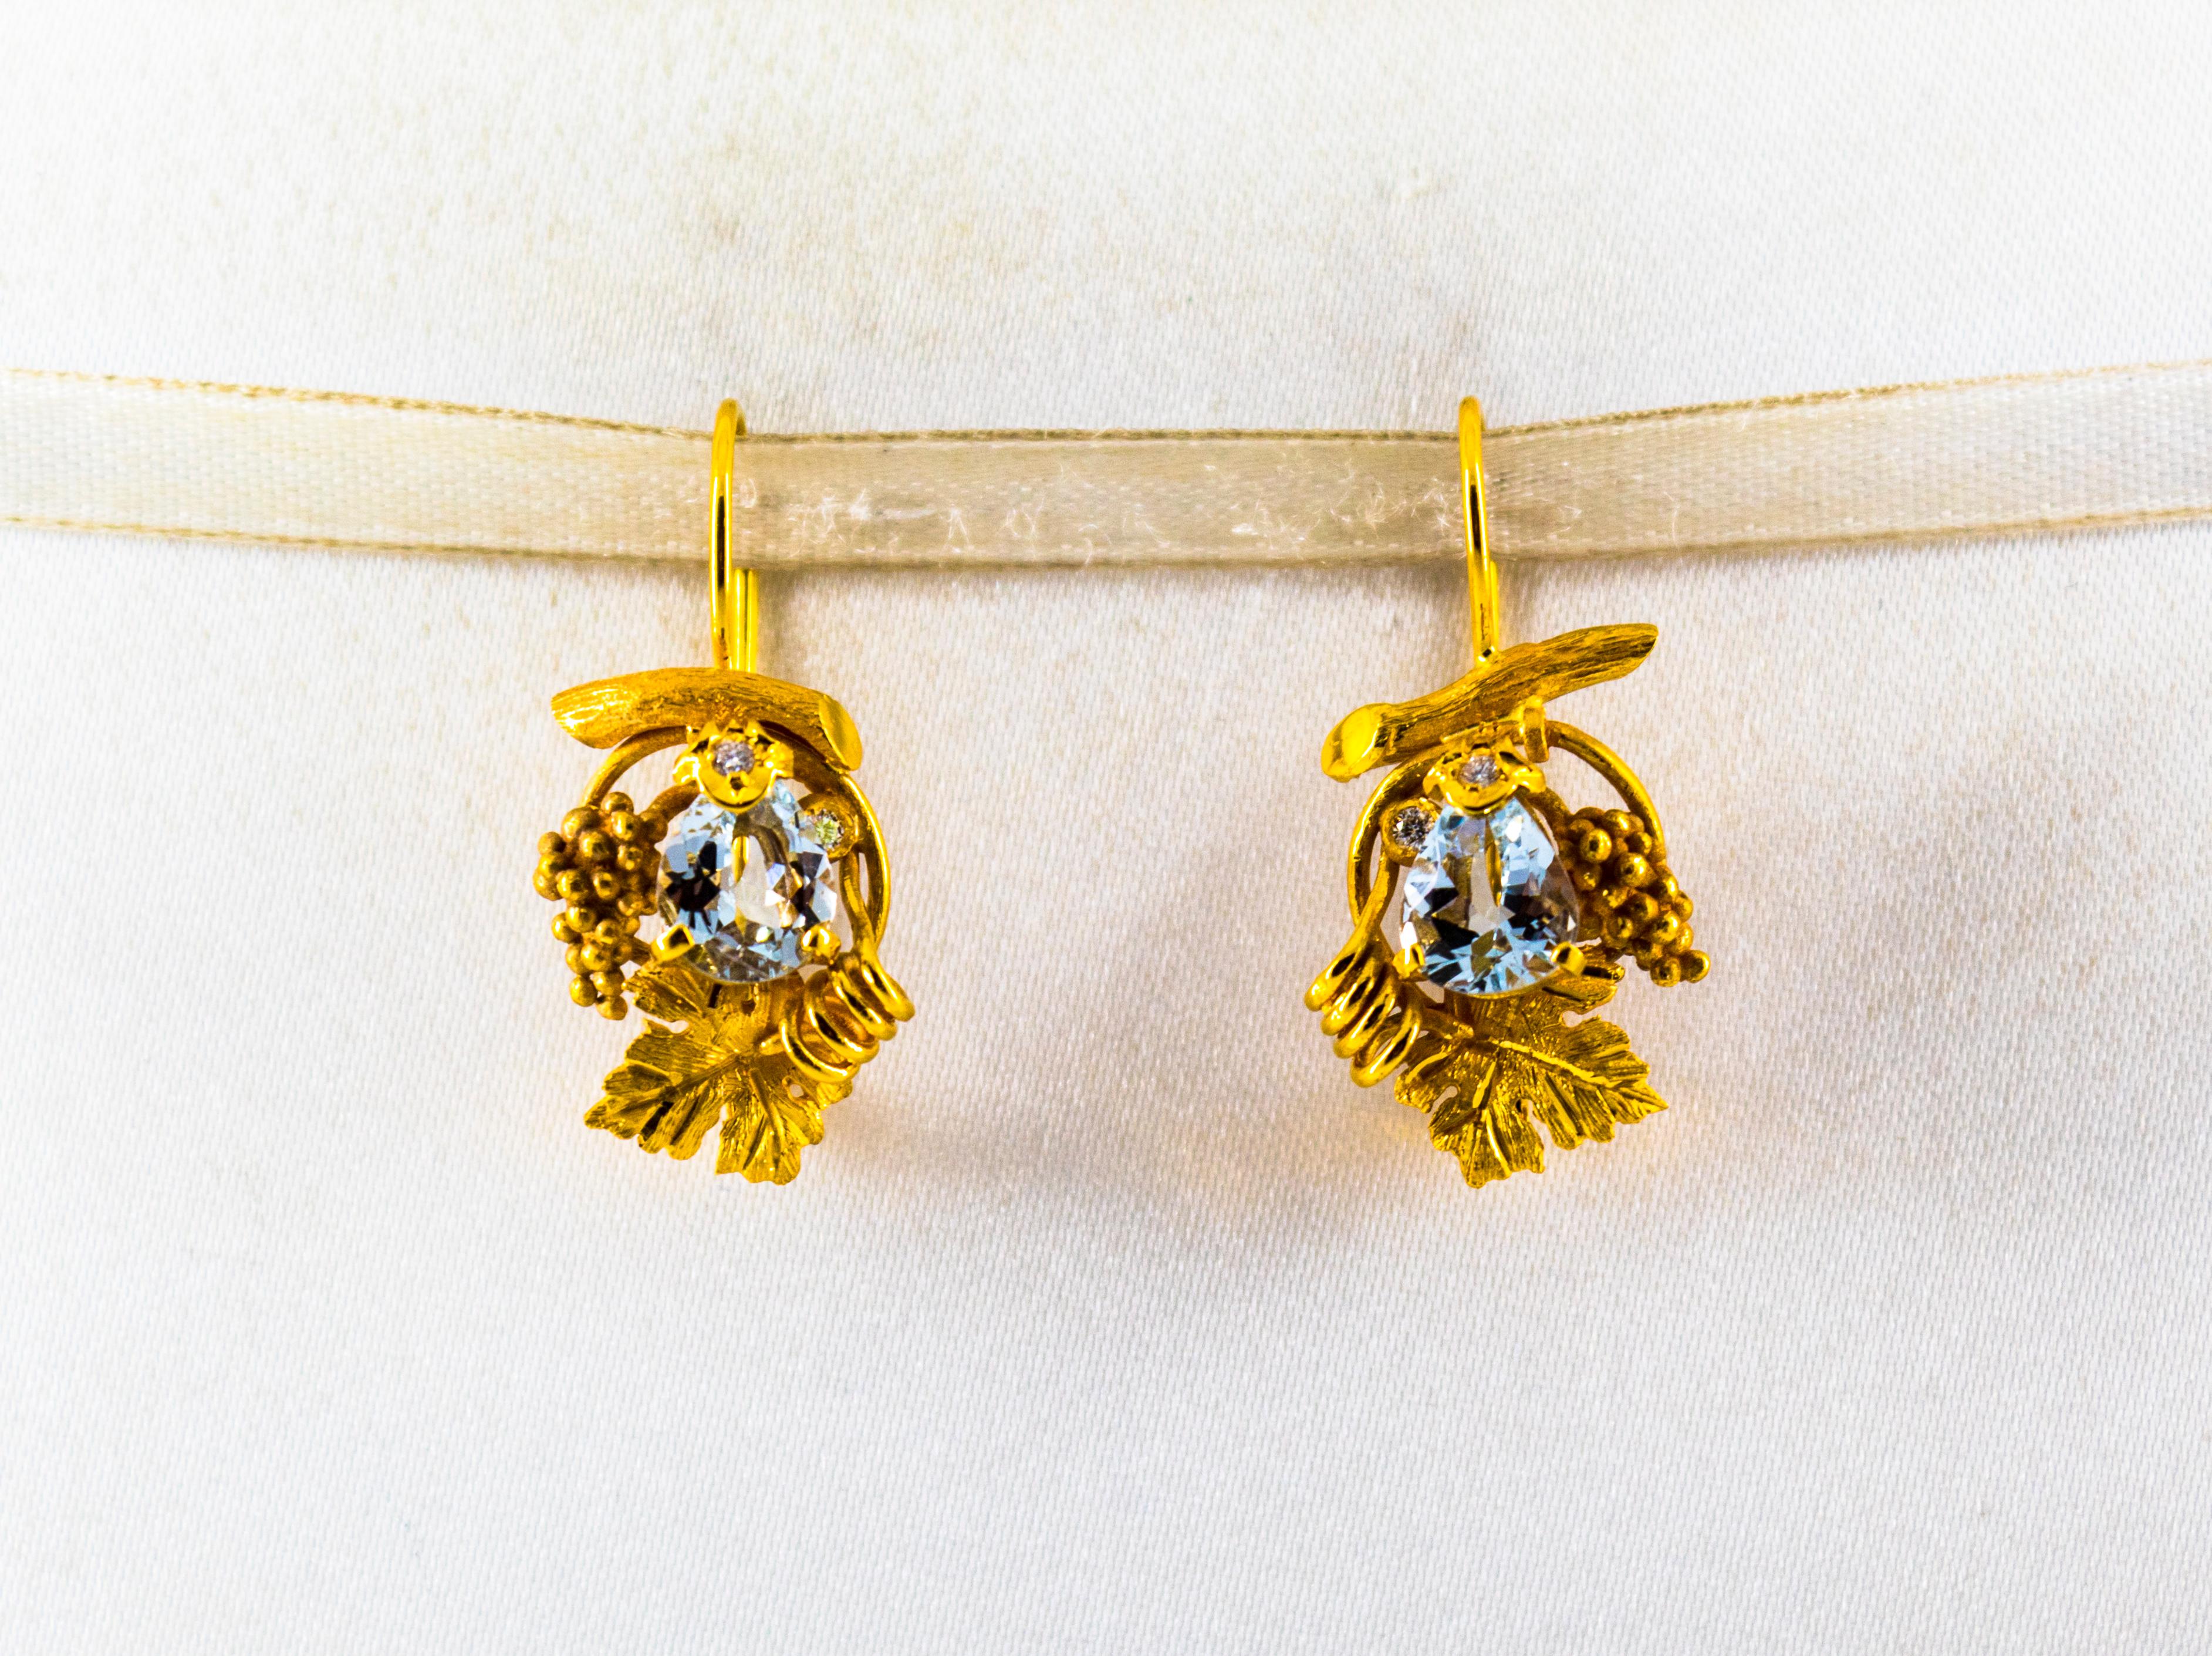 These Earrings are made of 14K Yellow Gold.
These Earrings have 0.12 Carats of White Diamonds.
These Earrings have 2.40 Carats of Aquamarine.
These Earrings are available also with Tanzanite.
These Earrings are inspired by Art Nouveau.
All our